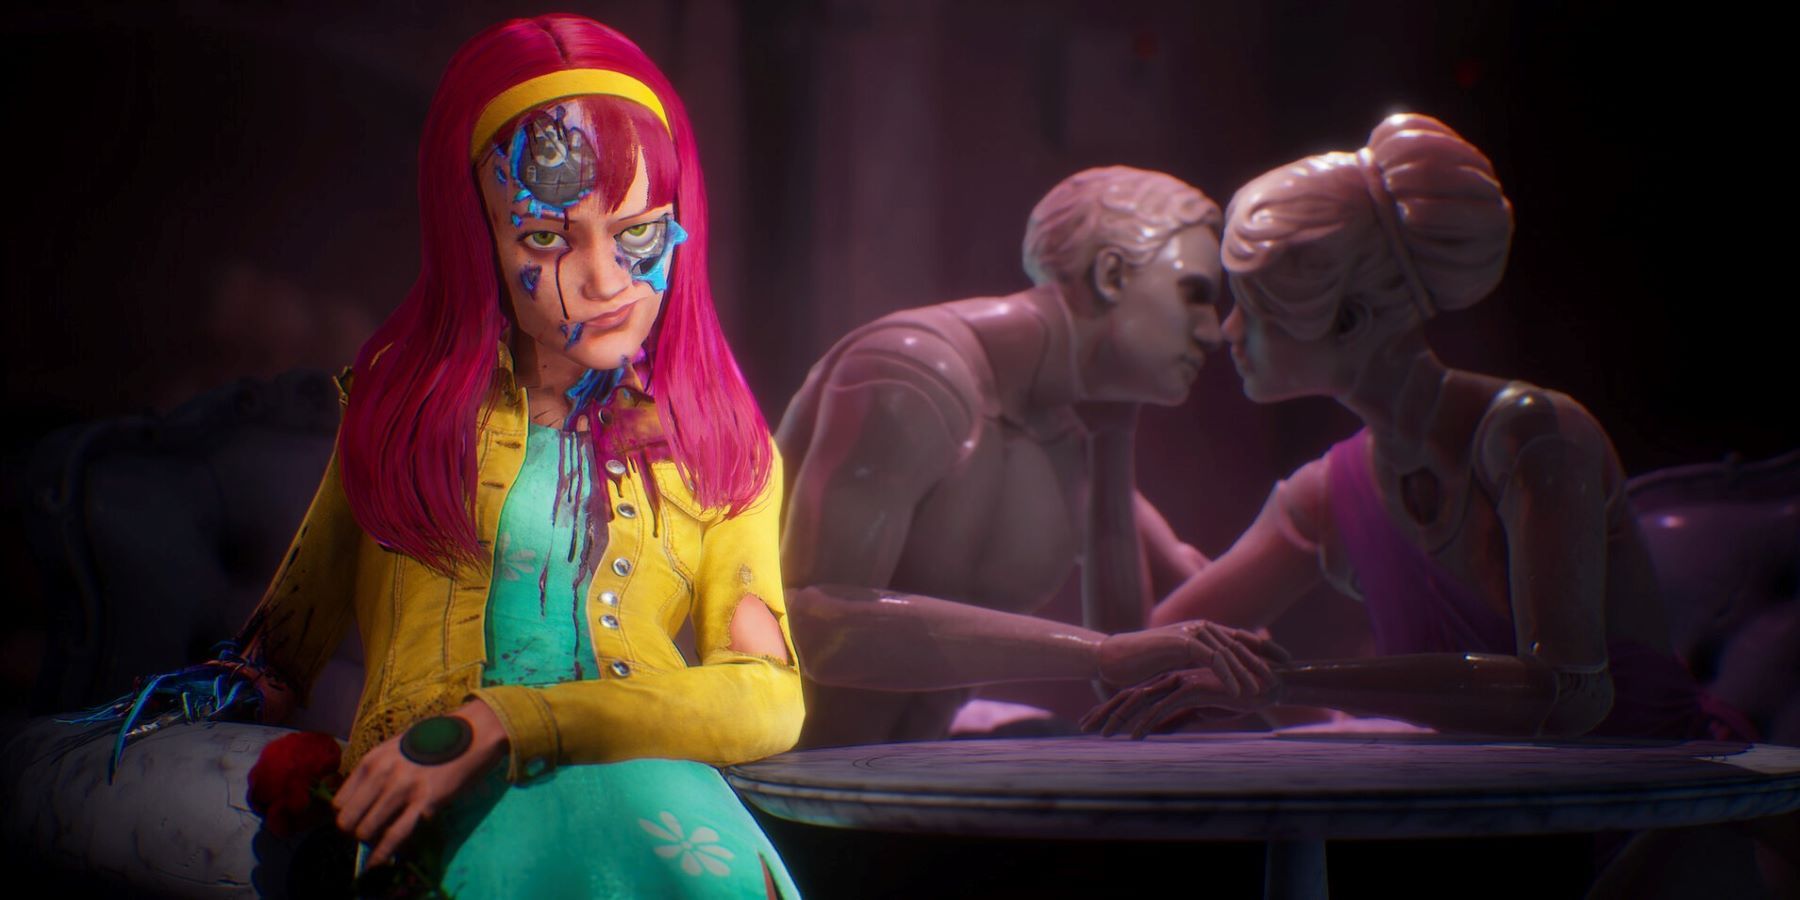 Screenshot from the Judas reveal trailer with a pink-haired android character